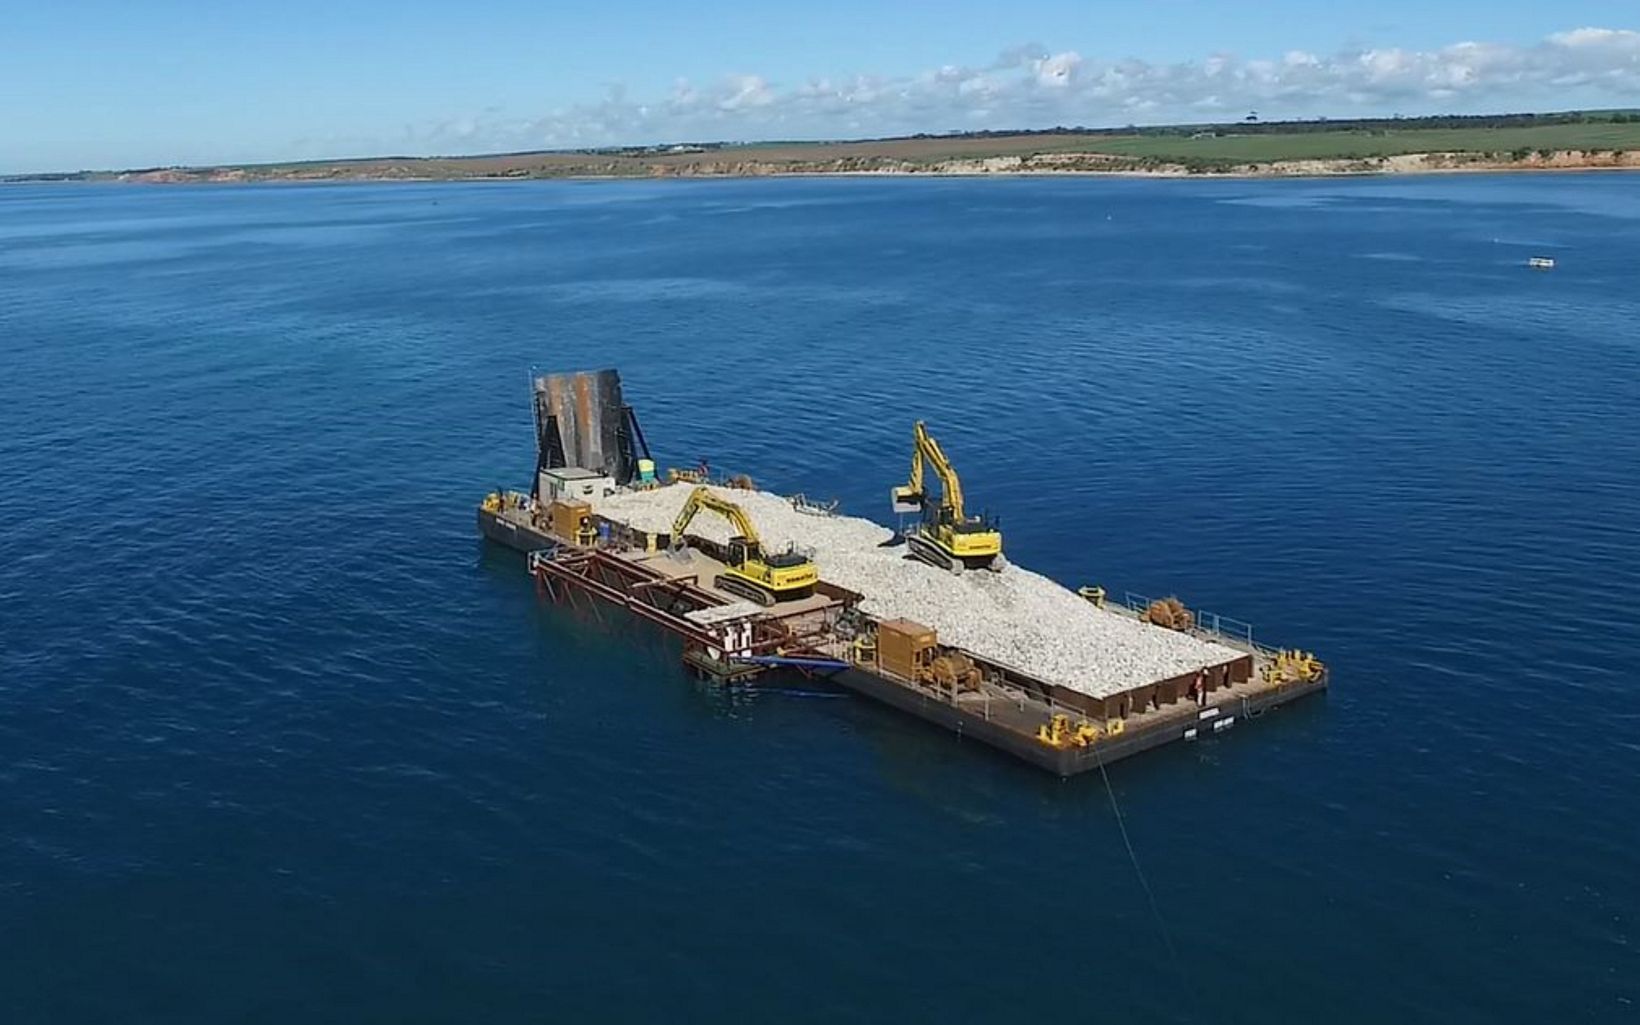 under construction off Rogues Point, SA - September 2018


